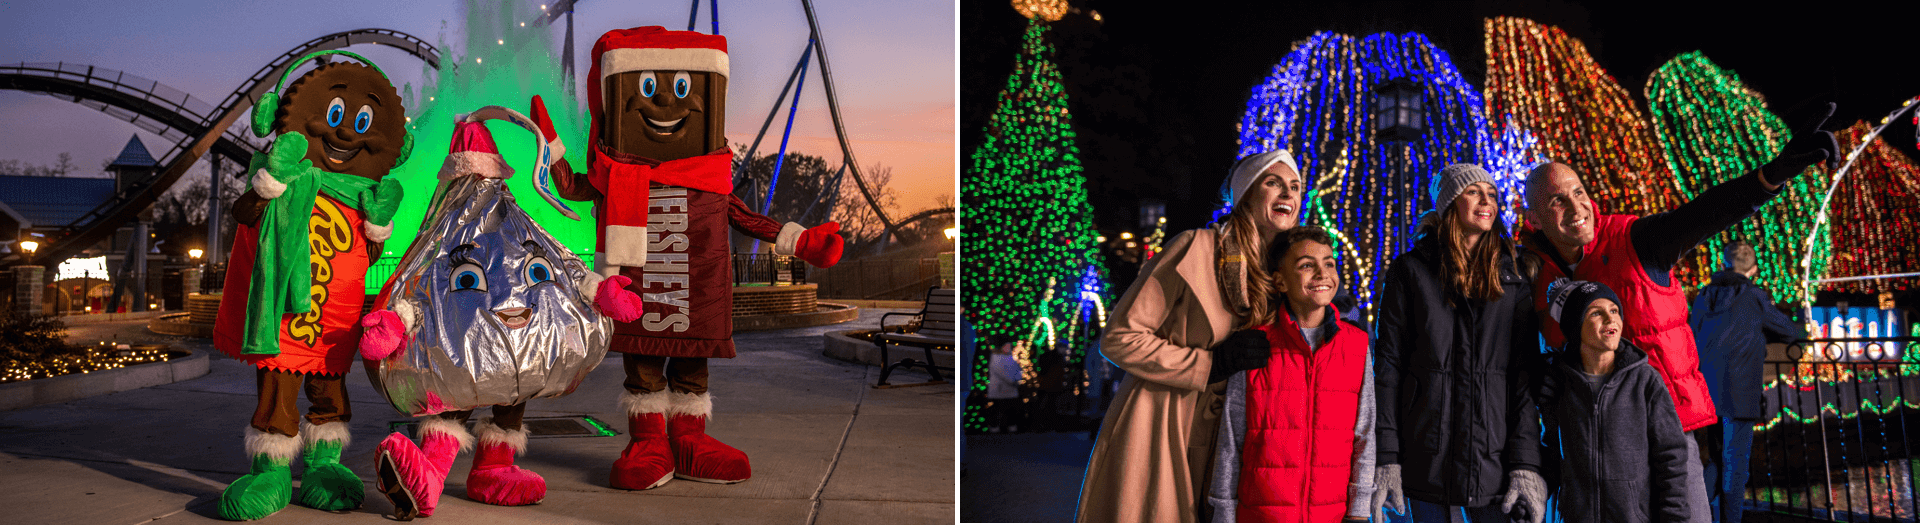 Hershey characters and family at Hersheypark Christmas Candylane